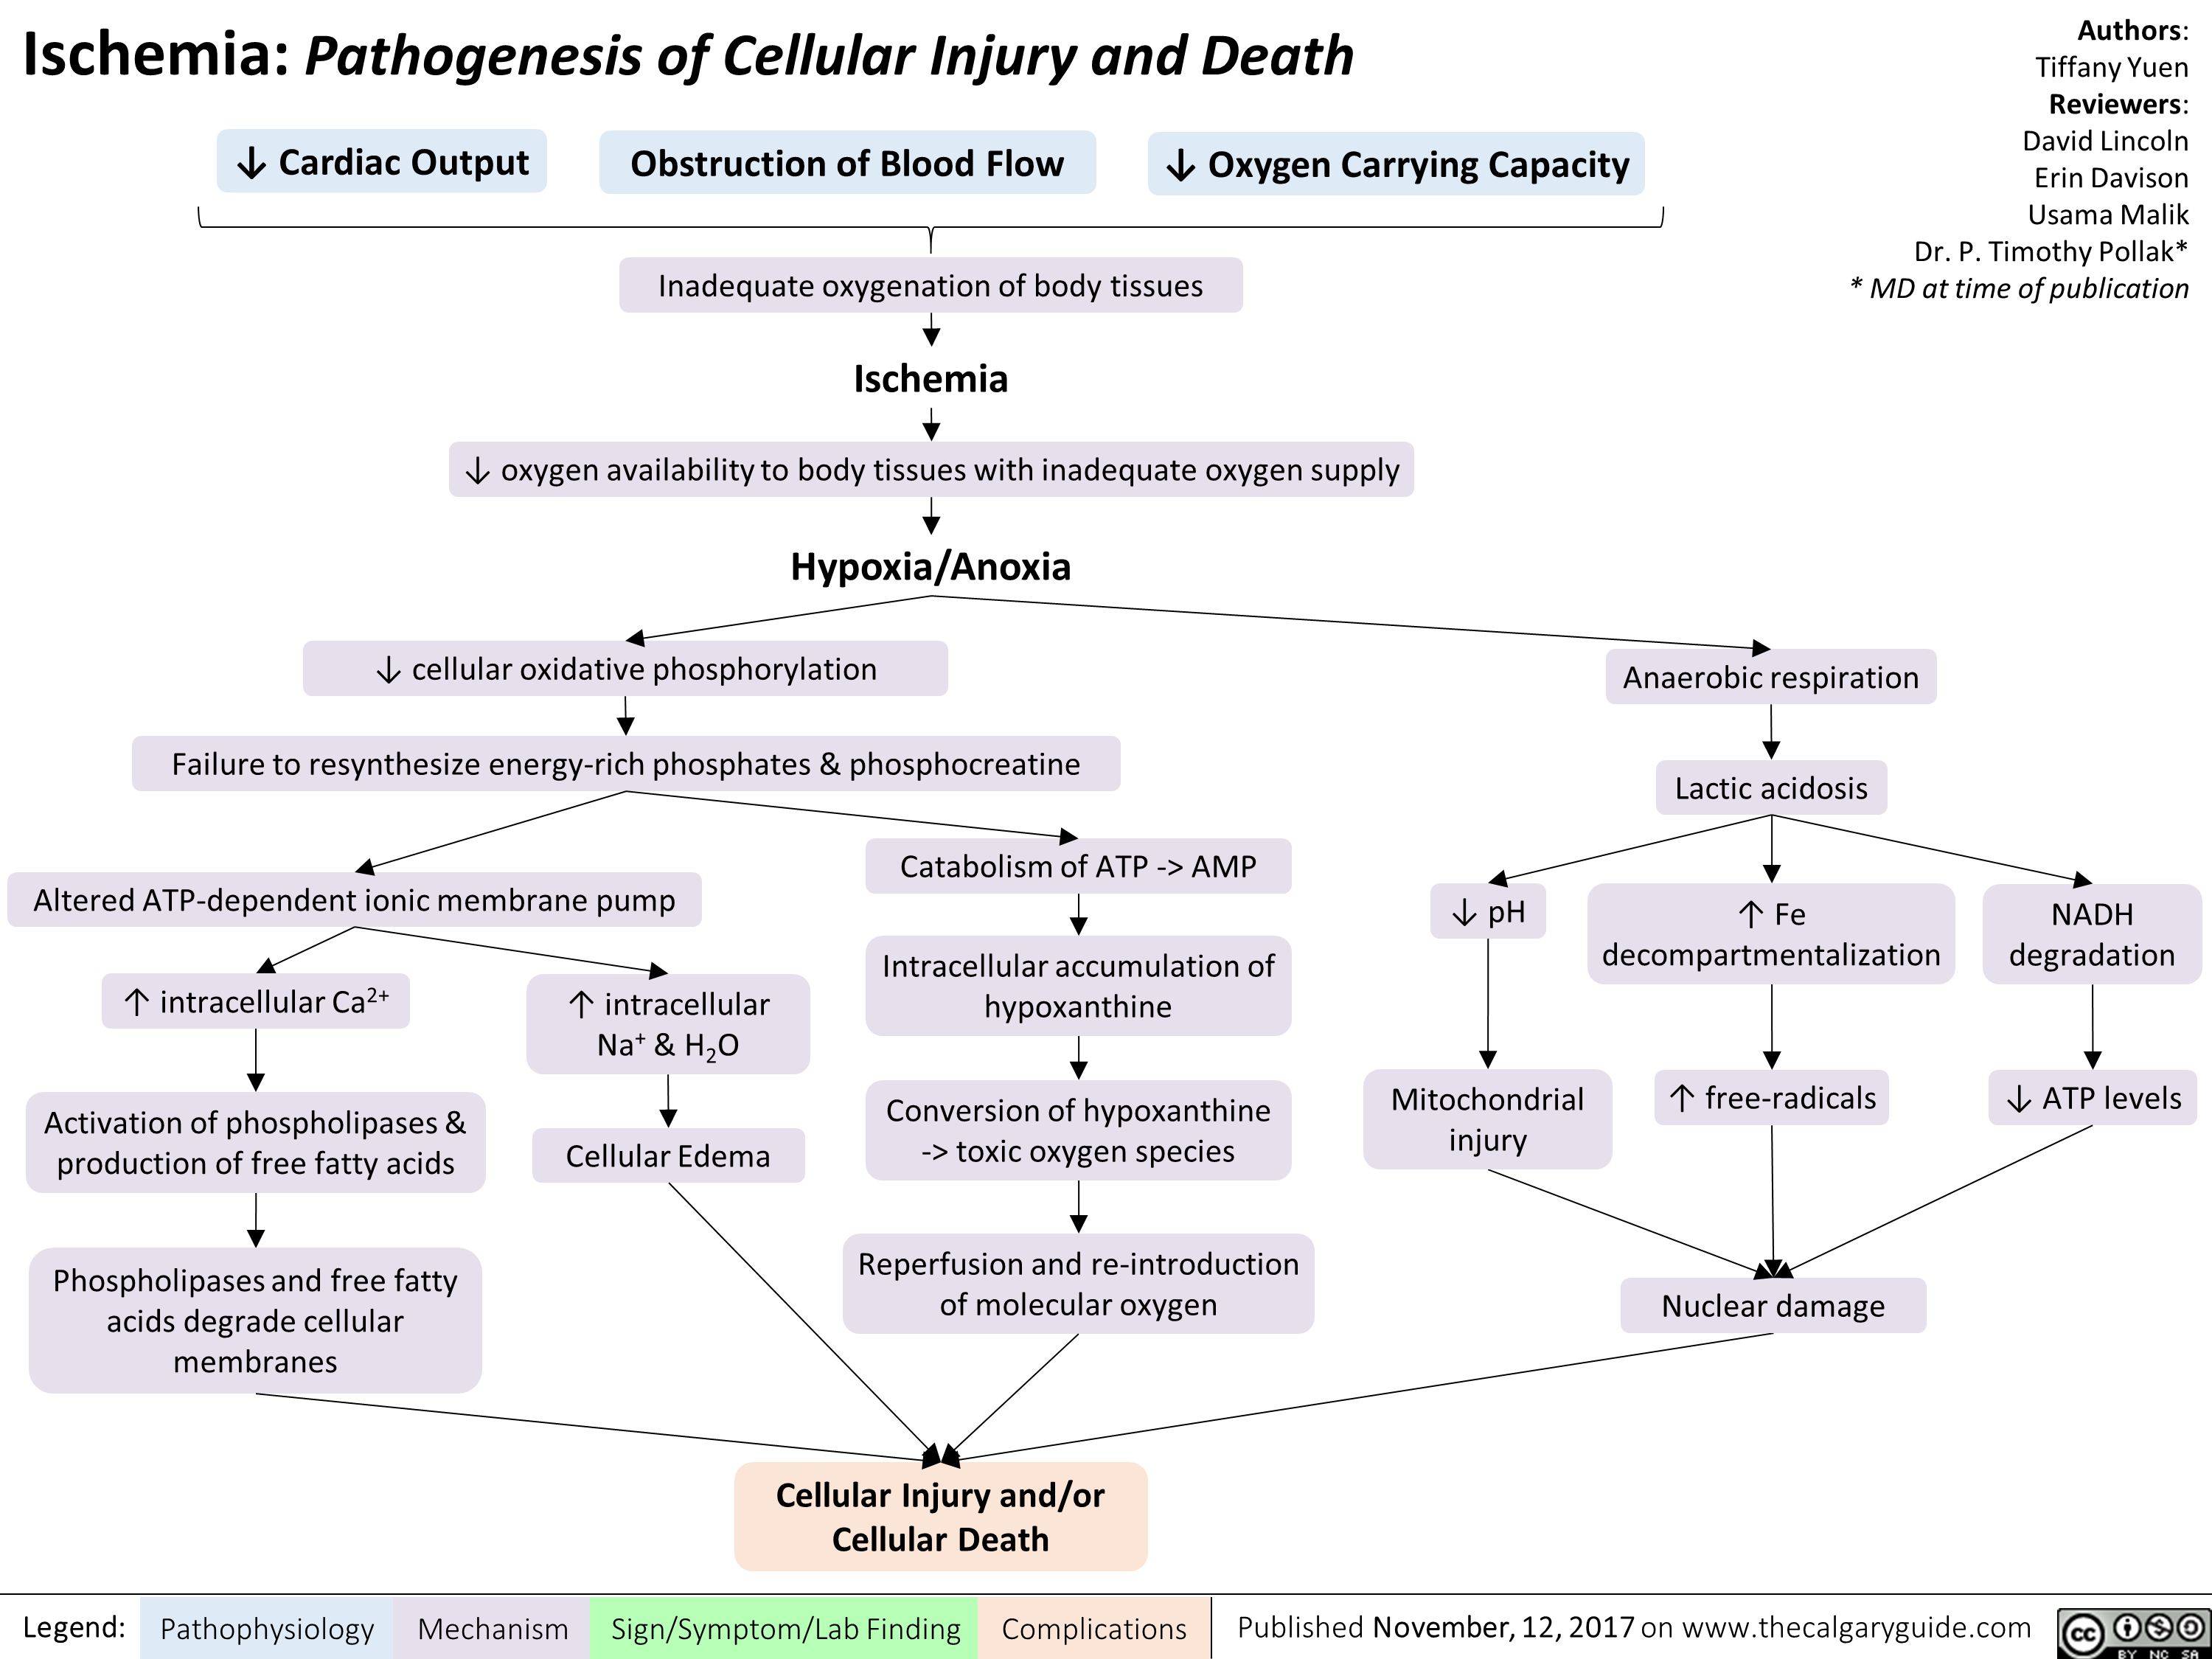 Ischemia: Pathogenesis of Cellular Injury and Death 
4, Cardiac Output 
Obstruction of Blood Flow 
4, Oxygen Carrying Capacity 
Inadequate oxygenation of body tissues 
• lschemia • 
4, oxygen availability to body tissues with inadequate oxygen supply 
• Hypoxia/Anoxia 
4, cellular oxidative phosphorylation 
Authors: Tiffany Yuen Reviewers: David Lincoln Erin Davison Usama Malik Dr. P. Timothy Pollak* * MD at time of publication 
Anaerobic respiration 
• vir Failure to resynthesize energy-rich phosphates & phosphocreatine 
Catabolism of ATP -> AMP Altered ATP-dependent ionic membrane pump Intracellular accumulation of intracellular Ca2+ intracellular hypoxanthine & H2O Conversion of hypoxanthine Activation of phospholipases & Cellular Edema production of free fatty acids -> toxic oxygen species Reperfusion and re-introduction Phospholipases and free fatty acids degrade cellular membranes of molecular oxygen 
Legend: 
Pathophysiology Mechanism 
Cellular Injury and/or Cellular Death 
Sign/Symptom/Lab Finding 
Complications 
4, pH 
Lactic acidosis 
• 
1` Fe decompartmentalization 
Mitochondrial injury 
1` free-radicals 
NADH degradation 
4, ATP levels 

Nuclear damage 